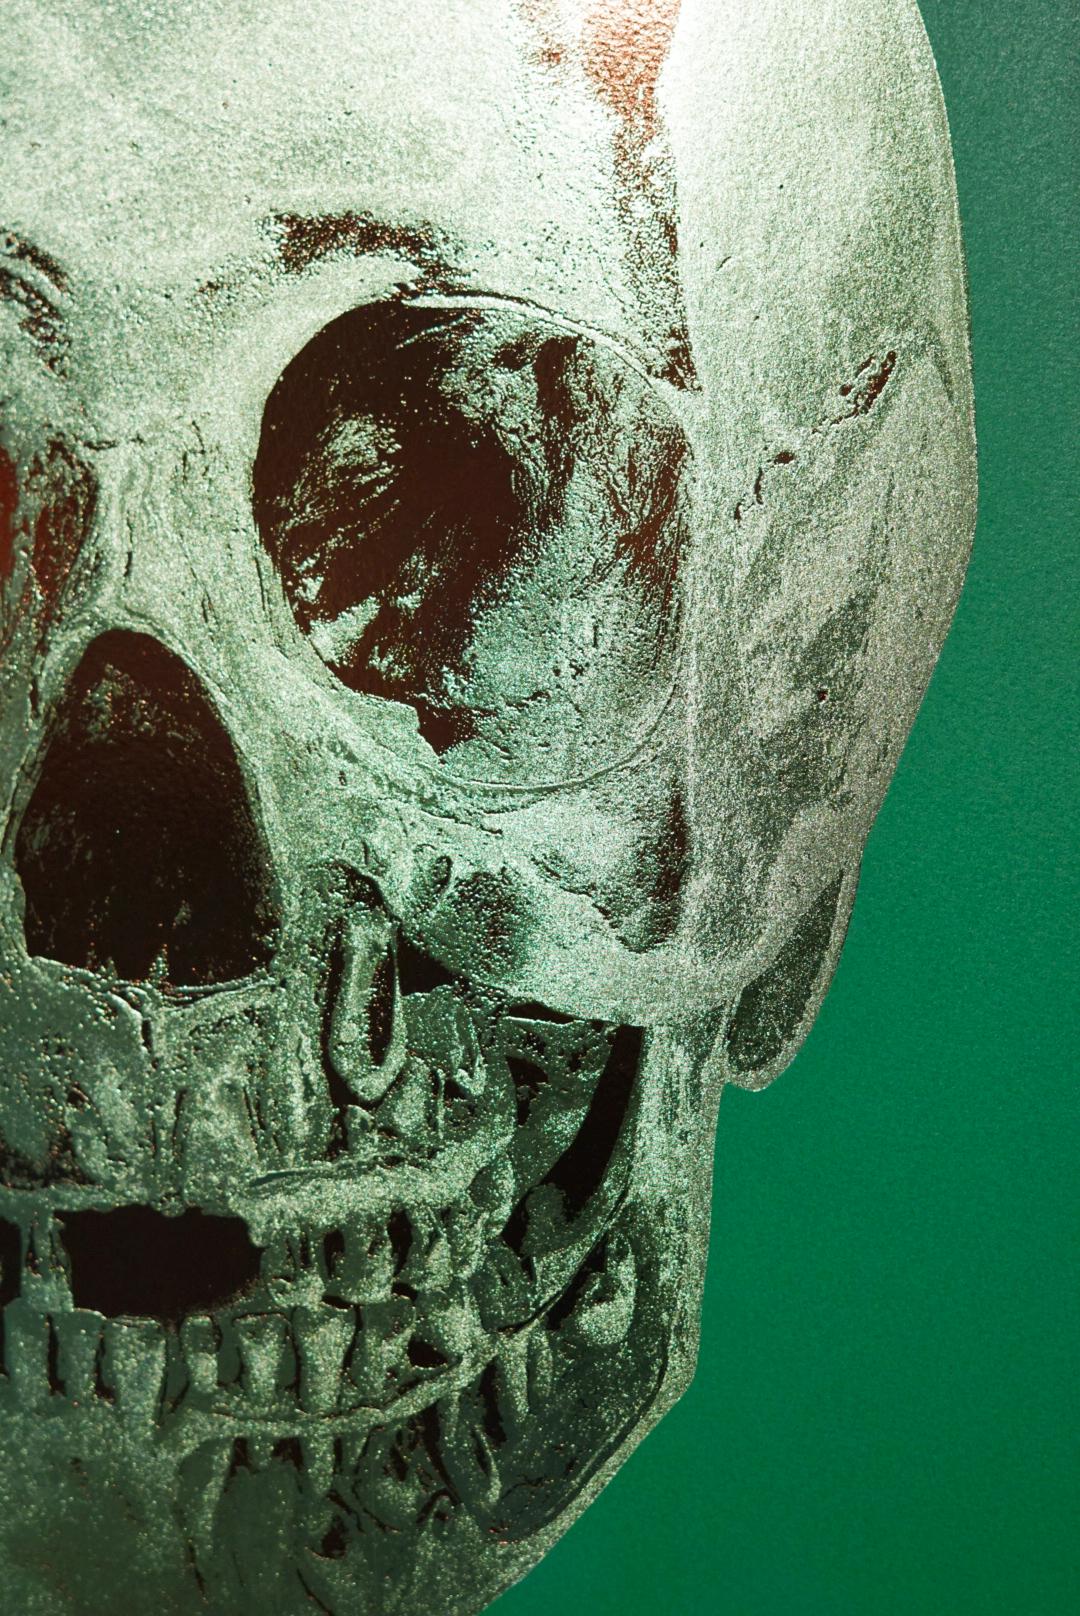 Skull, Green/Brown - Contemporary Print by Damien Hirst